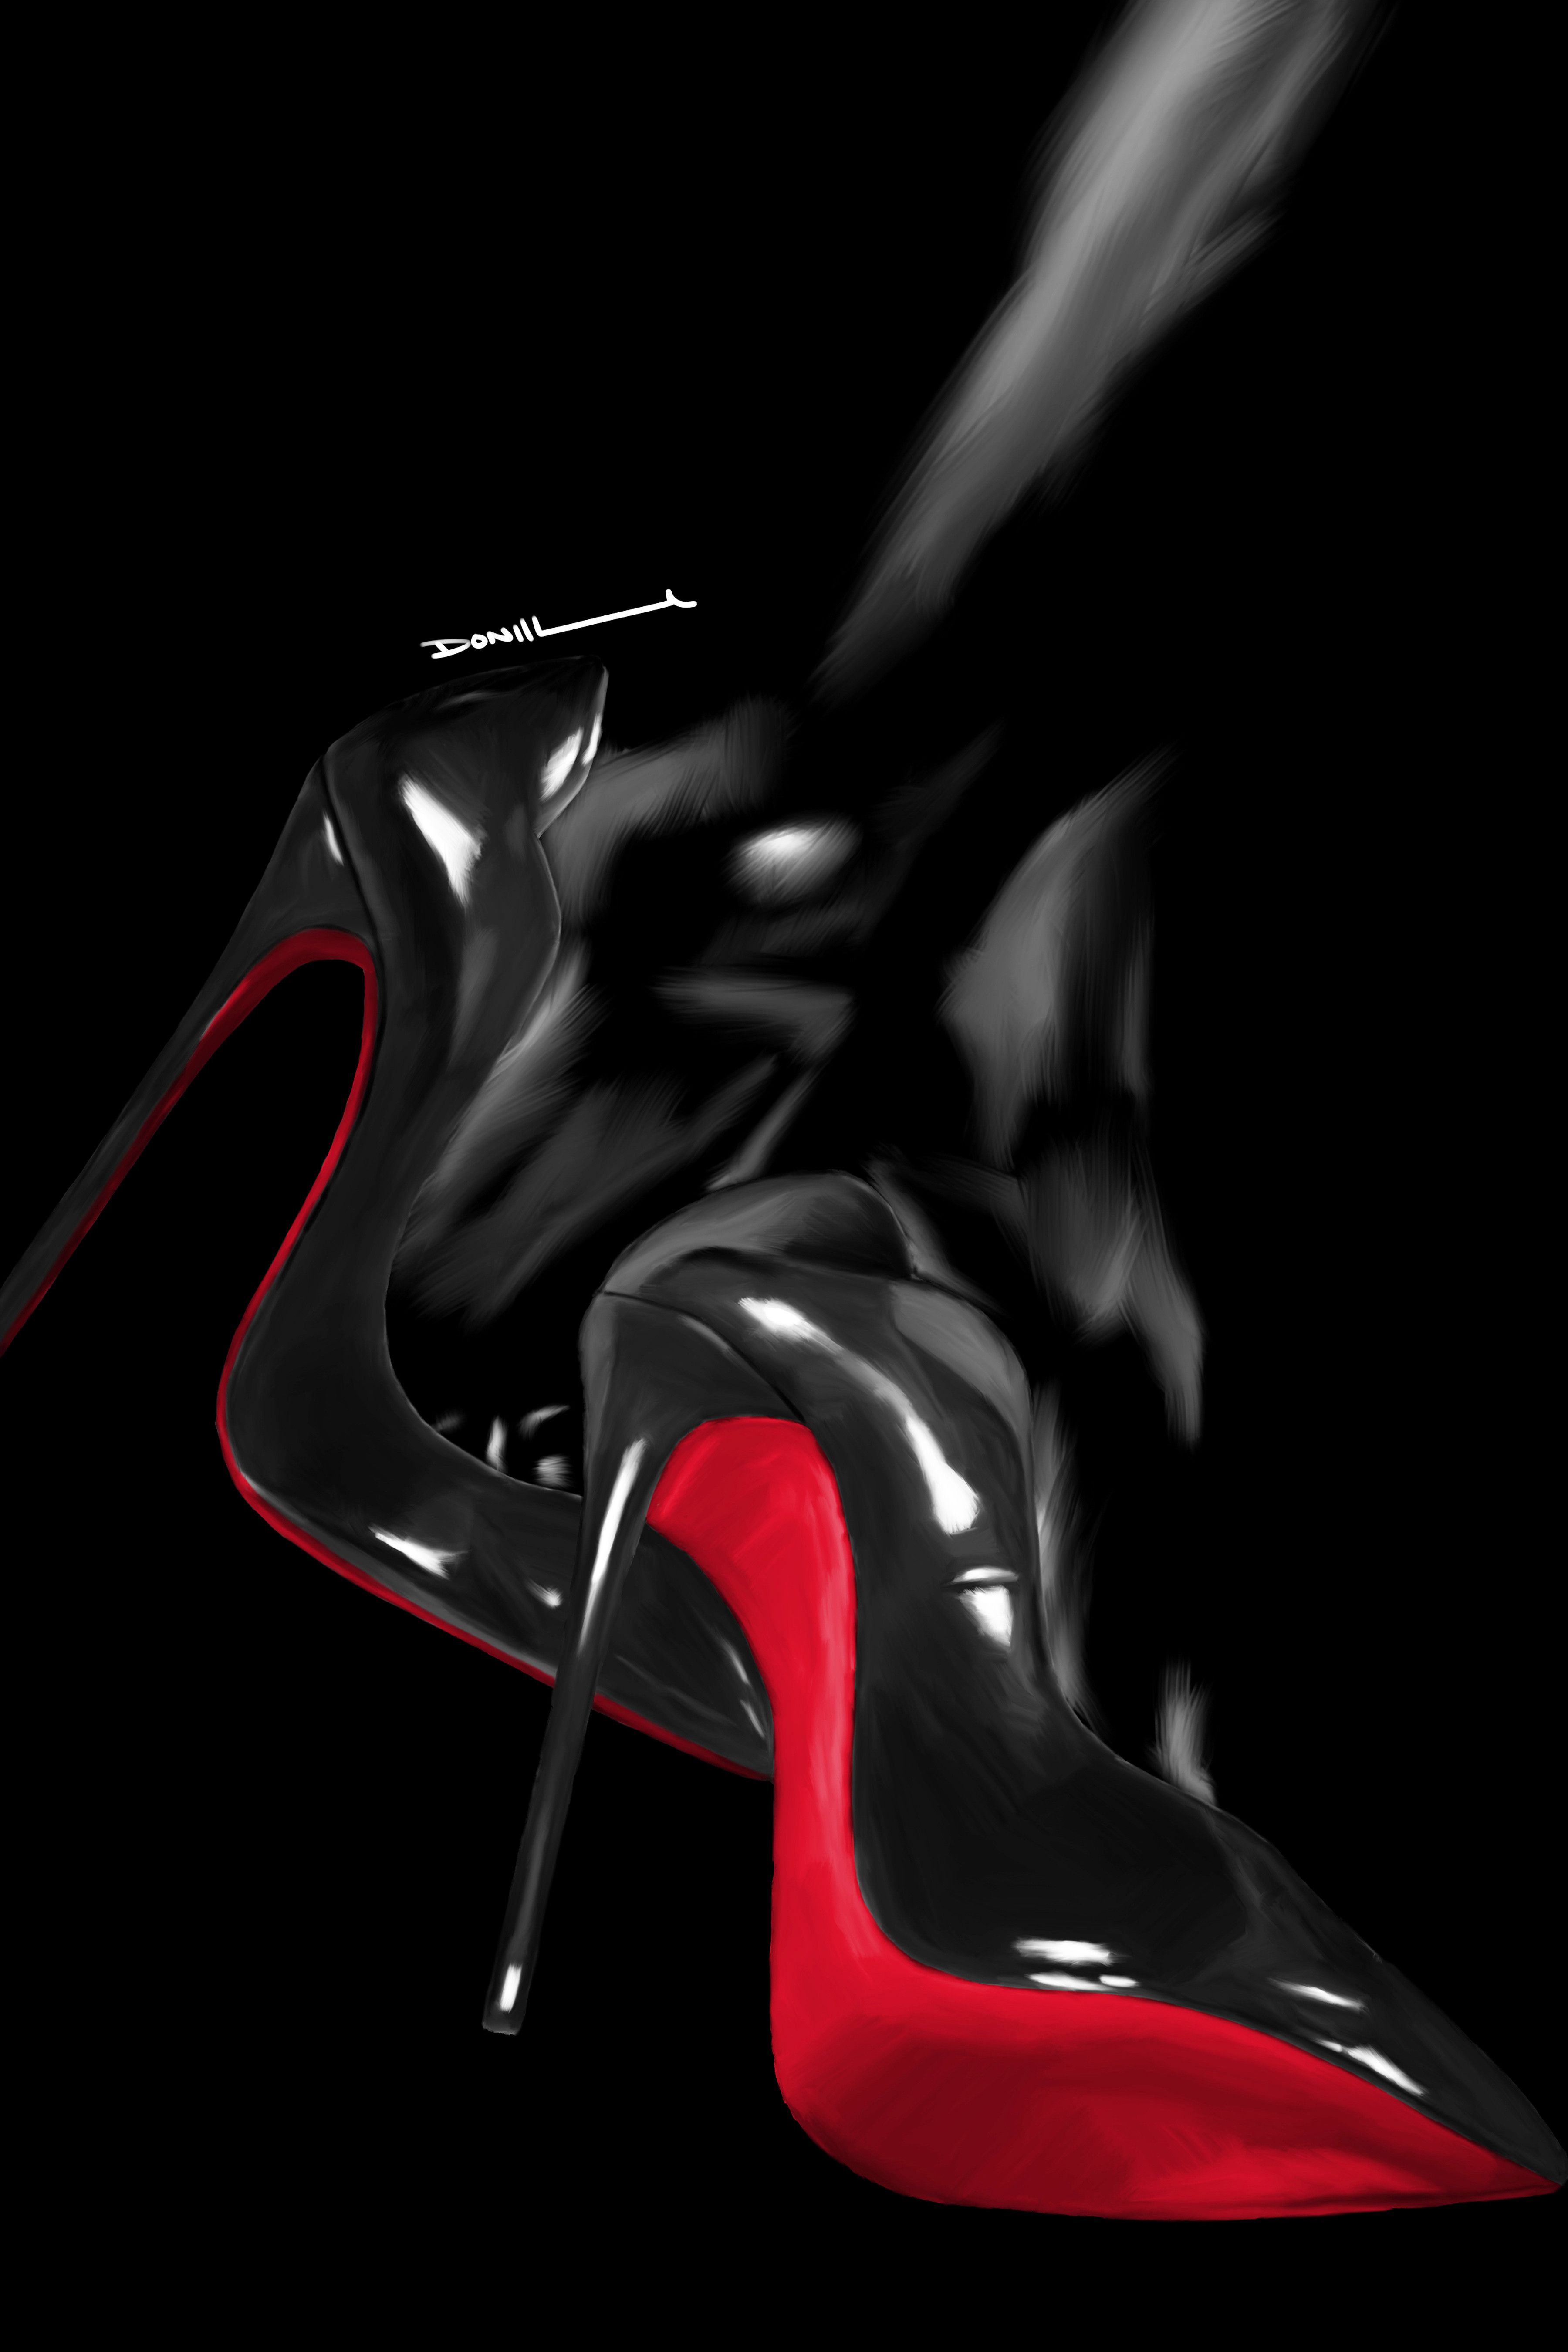 purchase this version here:
https://www.artstation.com/prints/art_poster/apqm/womens-red-and-black-high-heel-shoes-black-version